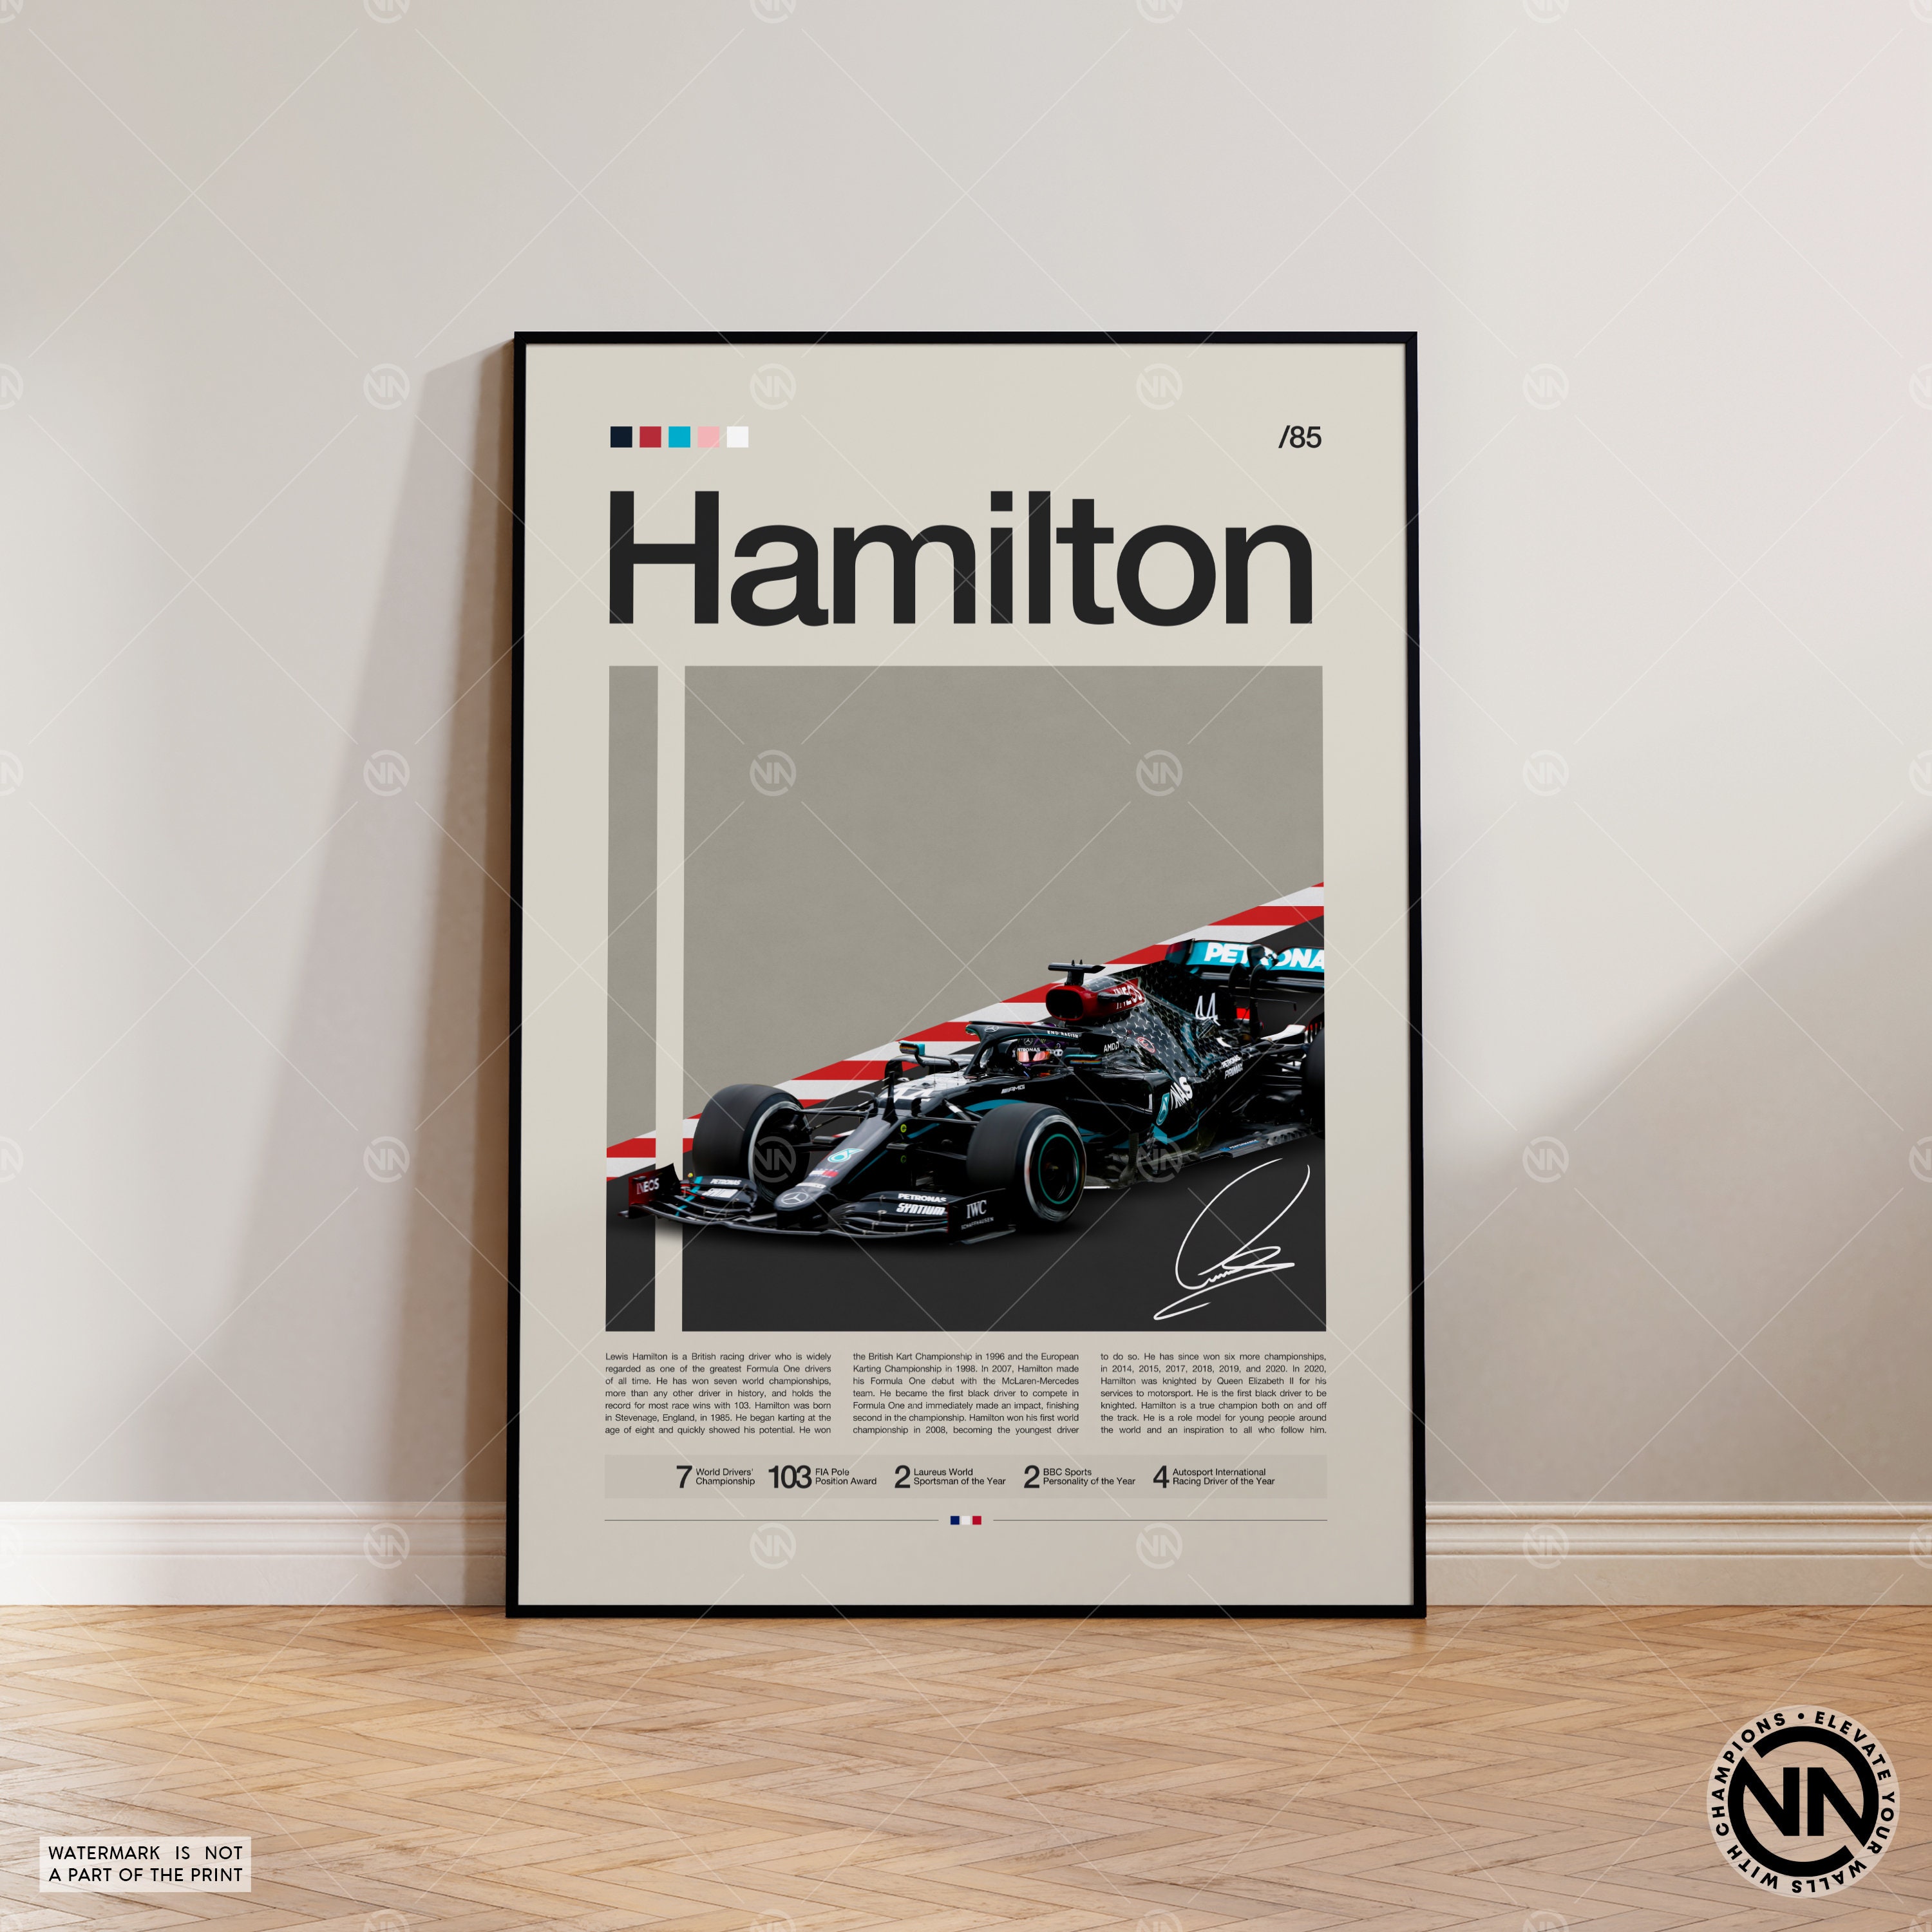 AAHARYA Lewis Hamilton F1 Car Poster Art Wall Decor (7) Canvas Painting  Posters And Prints Wall Art Pictures for Living Room Bedroom Decor